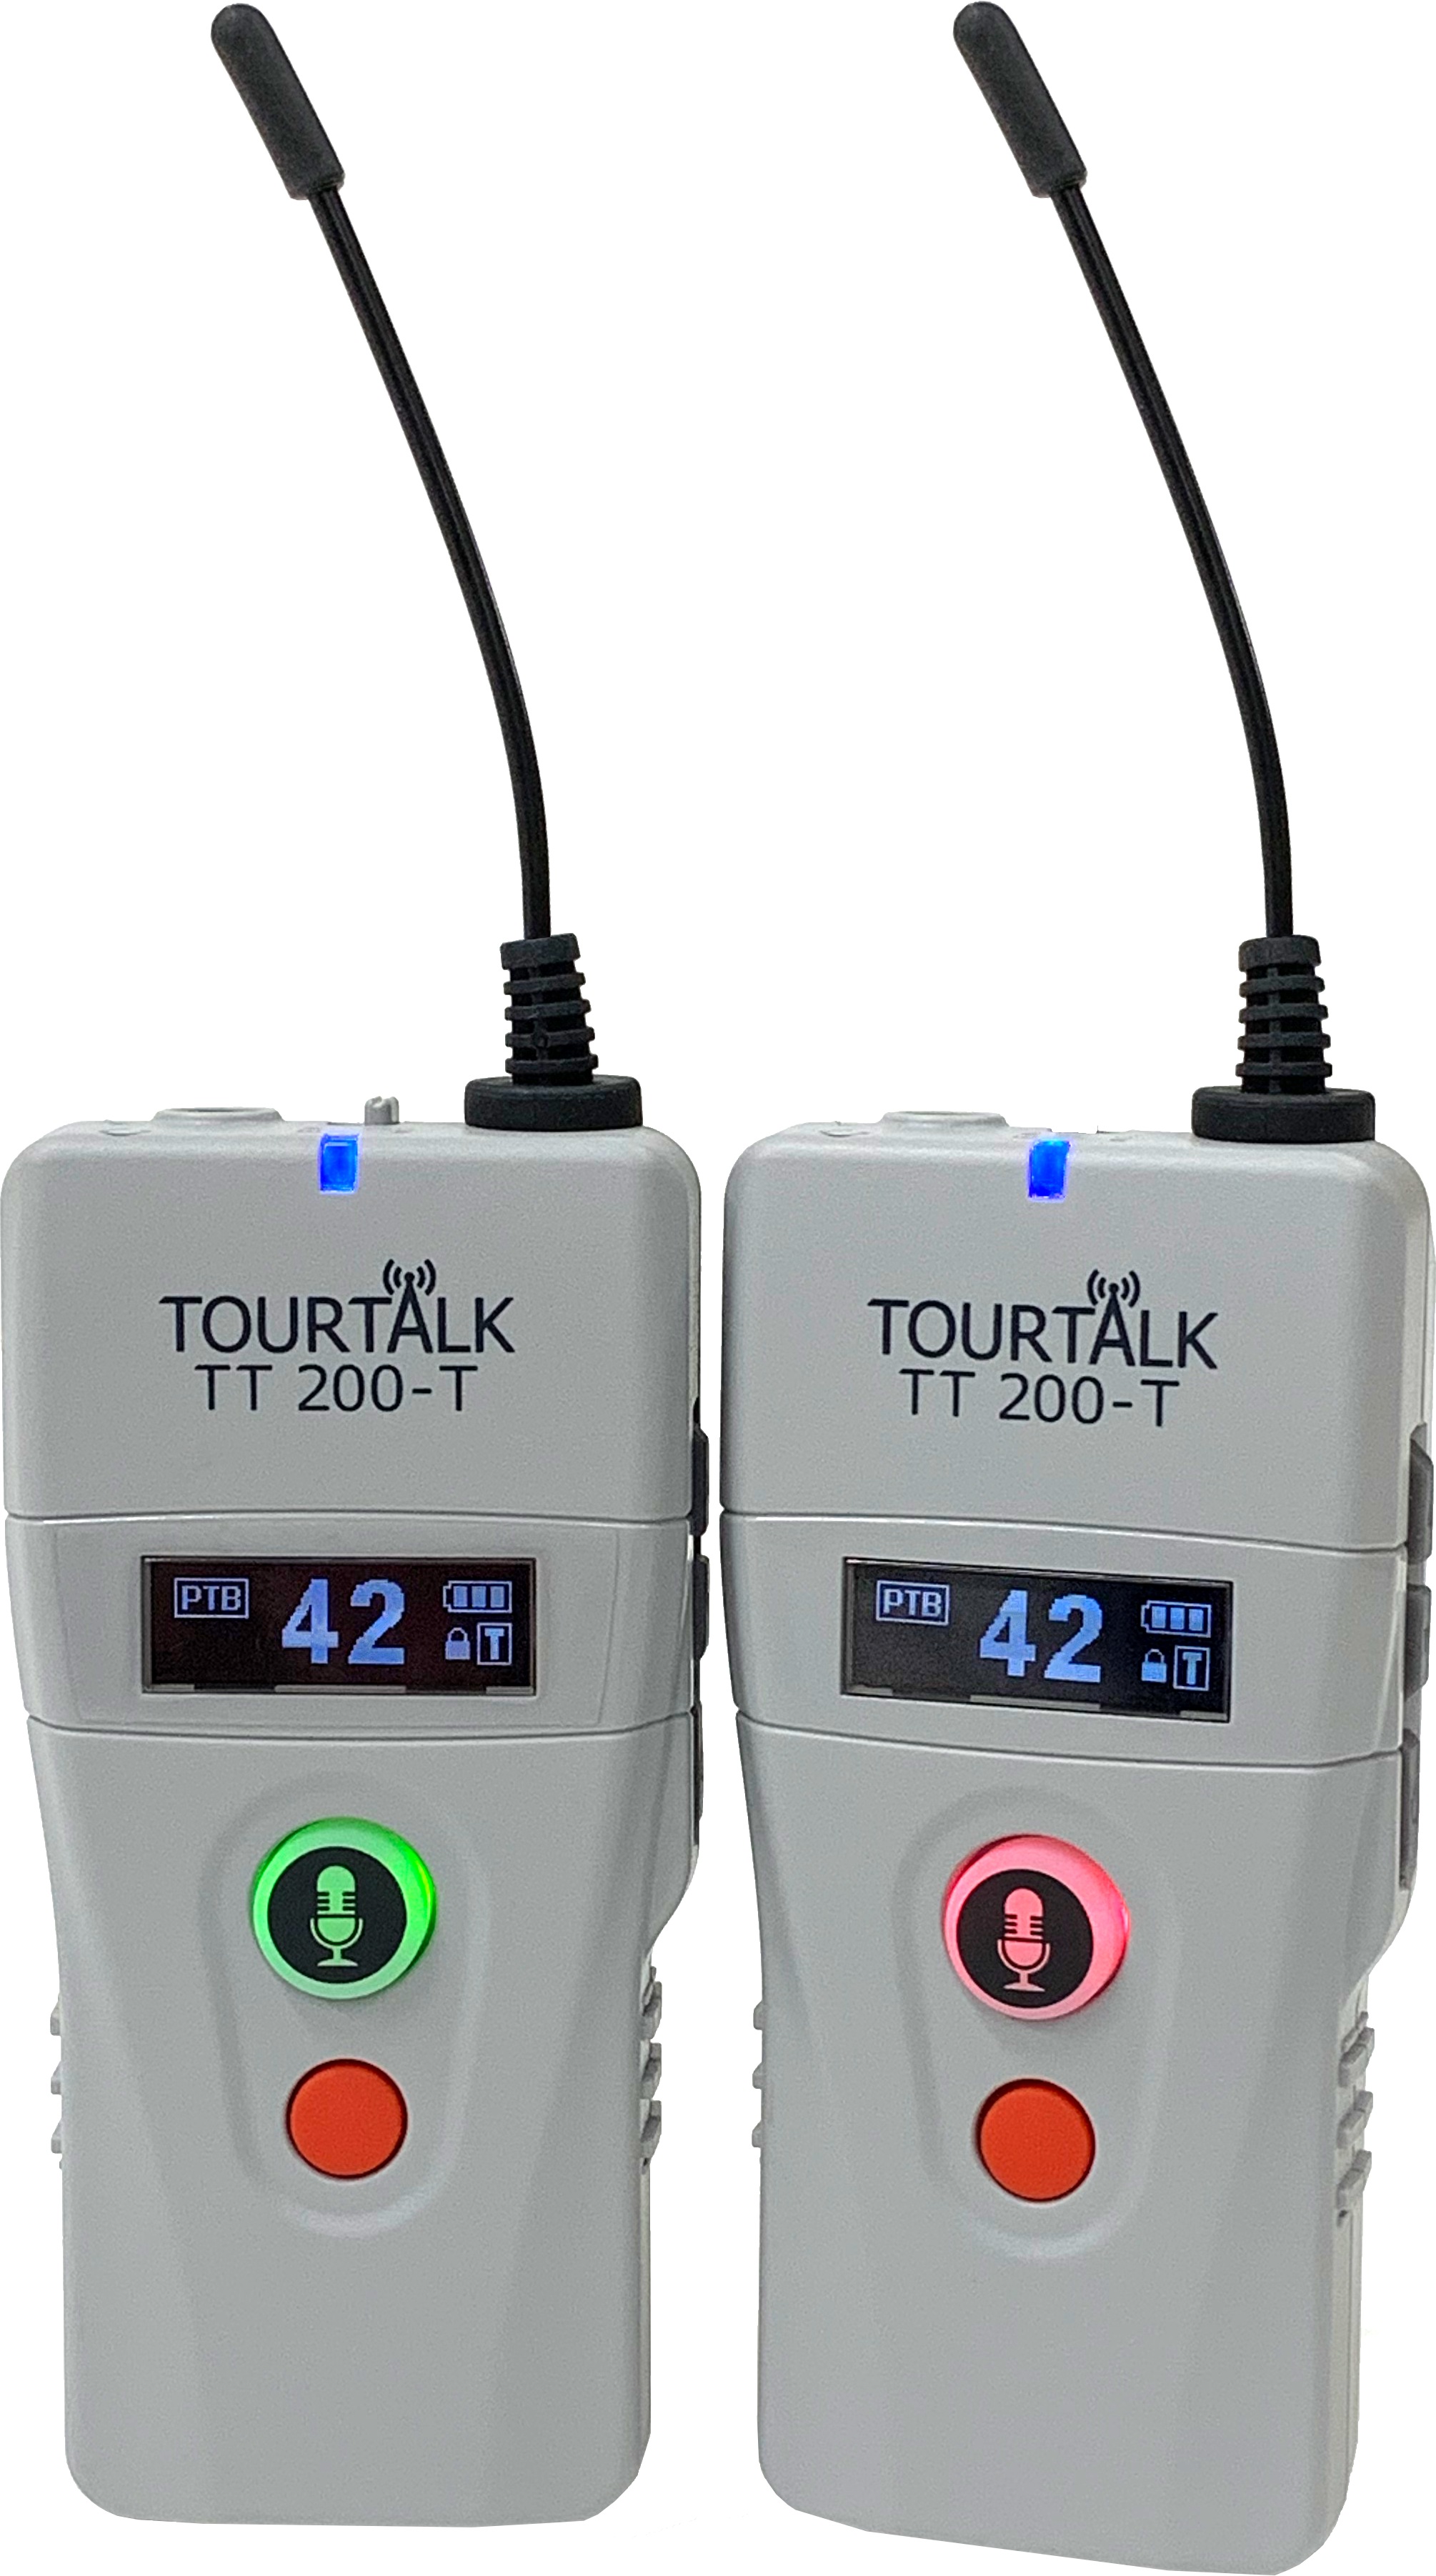 Wireless two-way communication system transmitters for social distancing staff